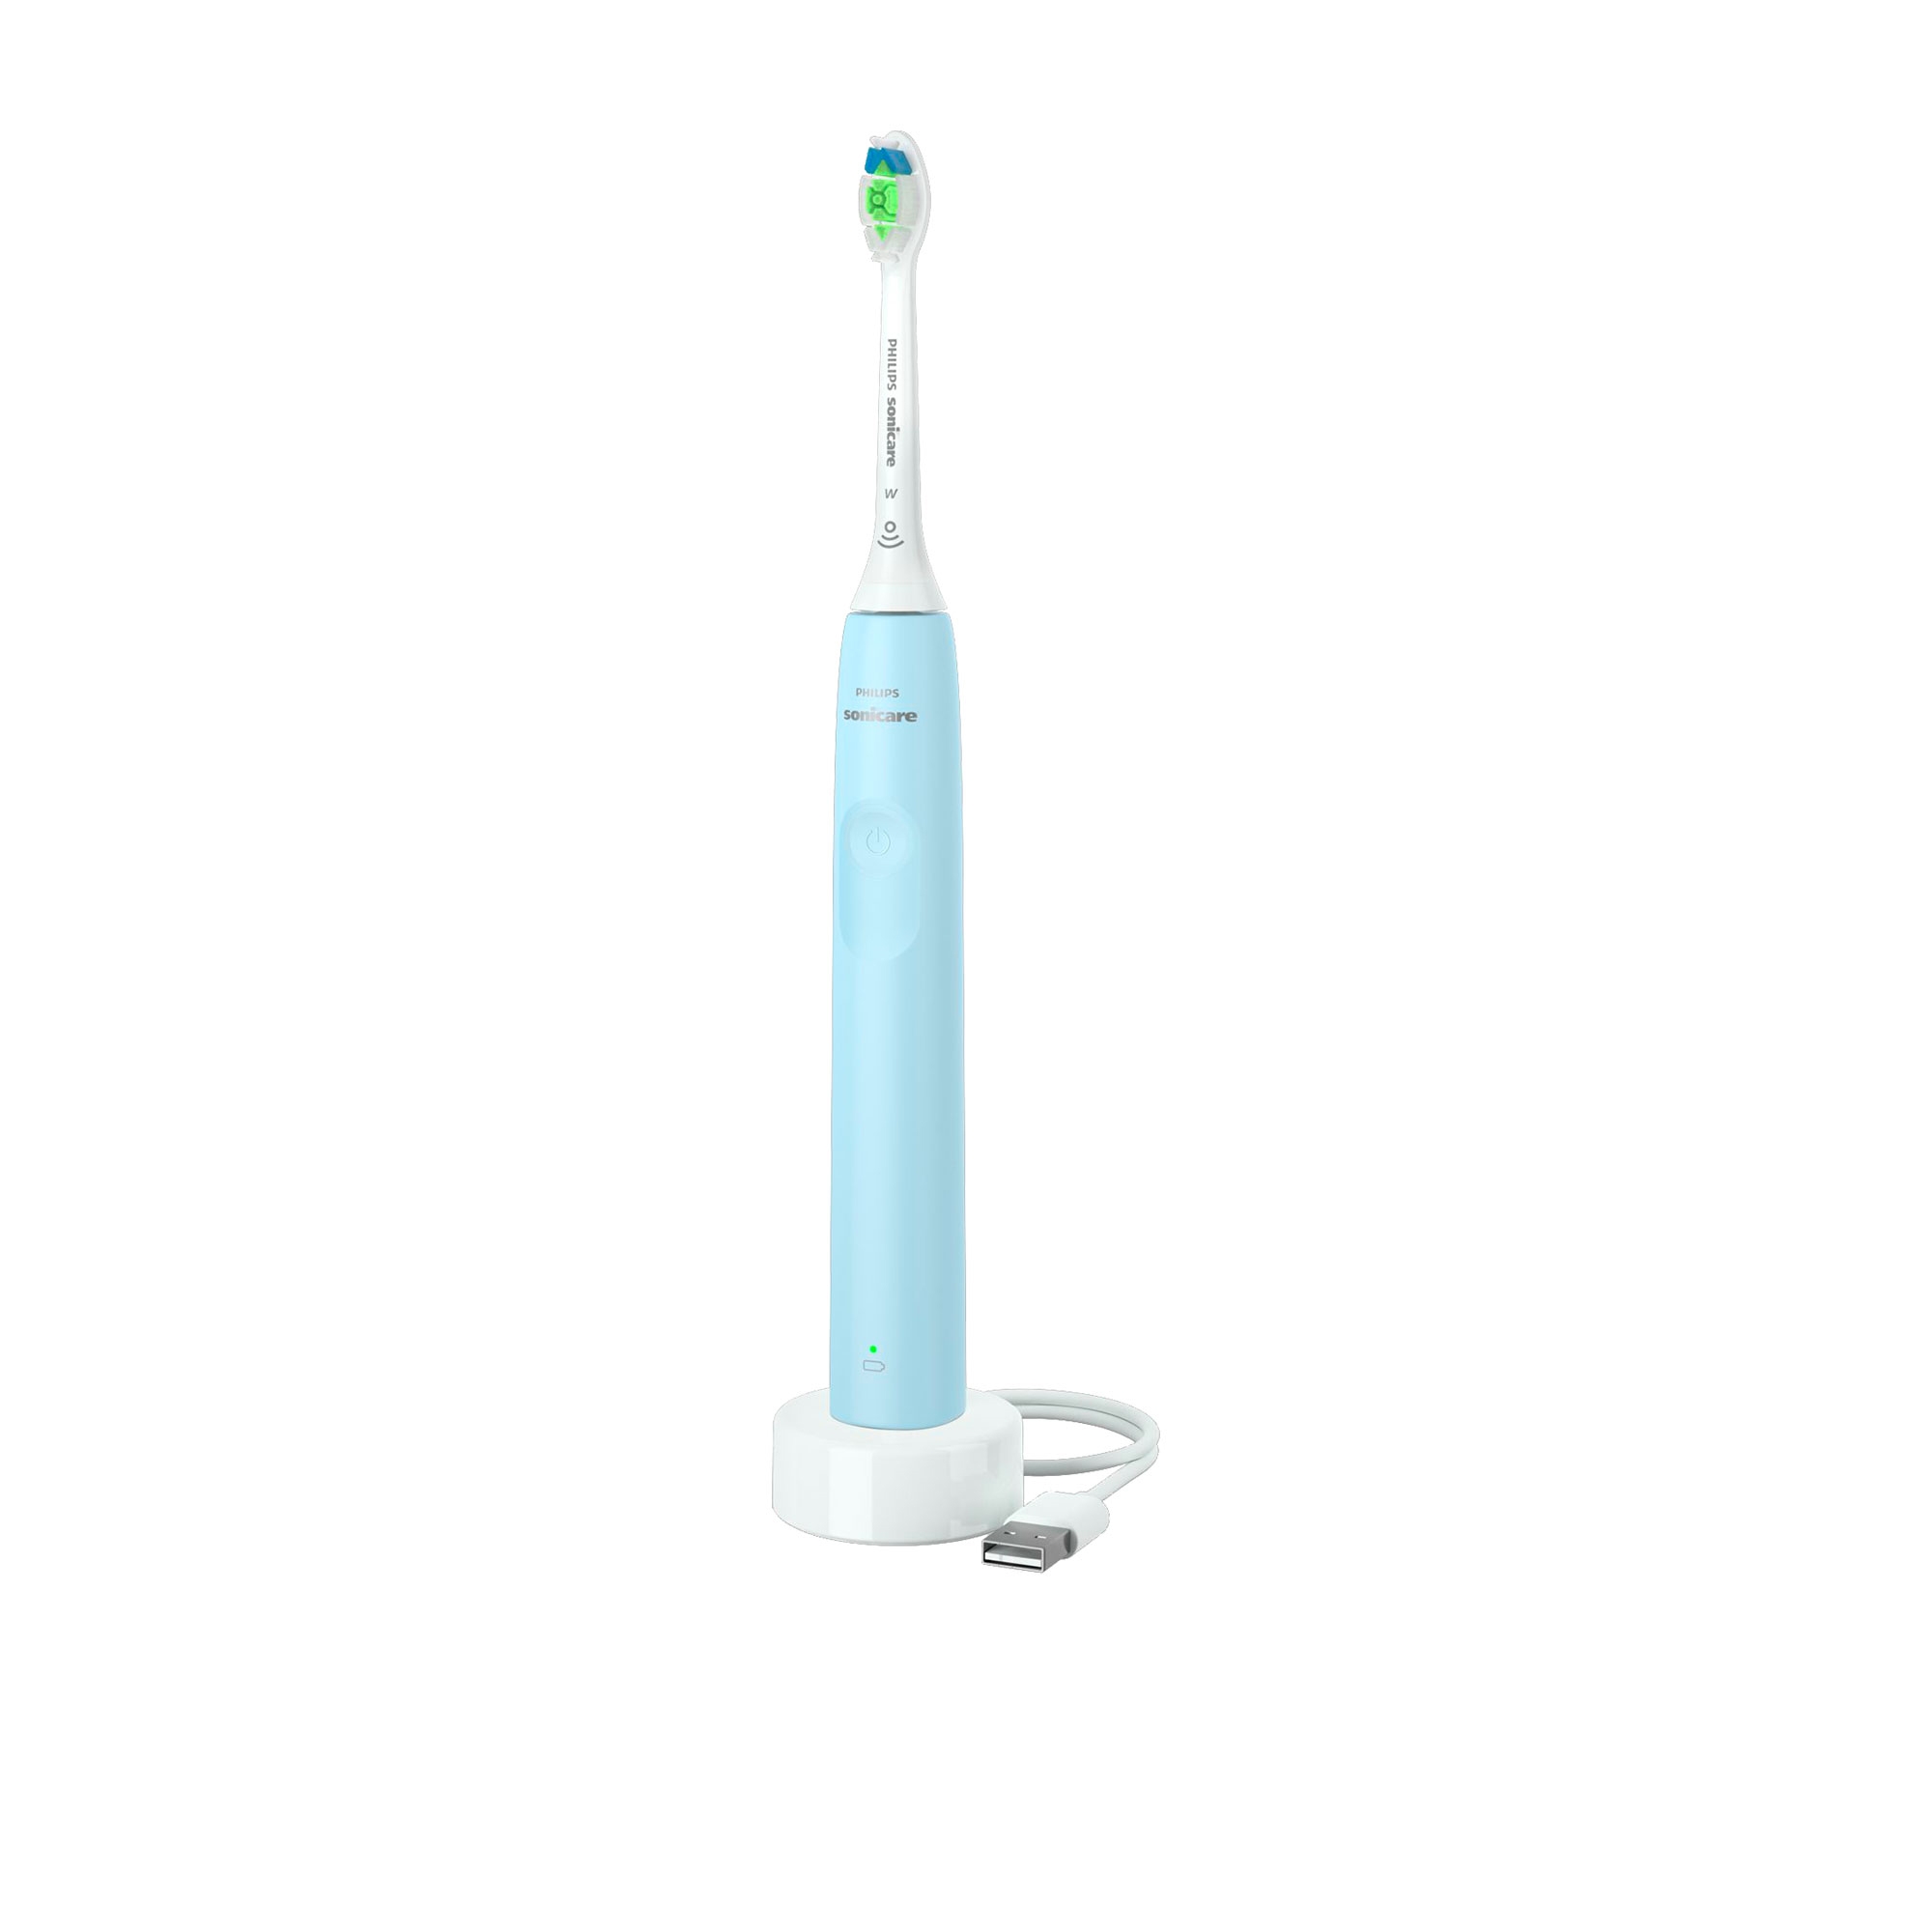 Philips Sonicare 2100 Series Electric Toothbrush Baby Blue Image 2